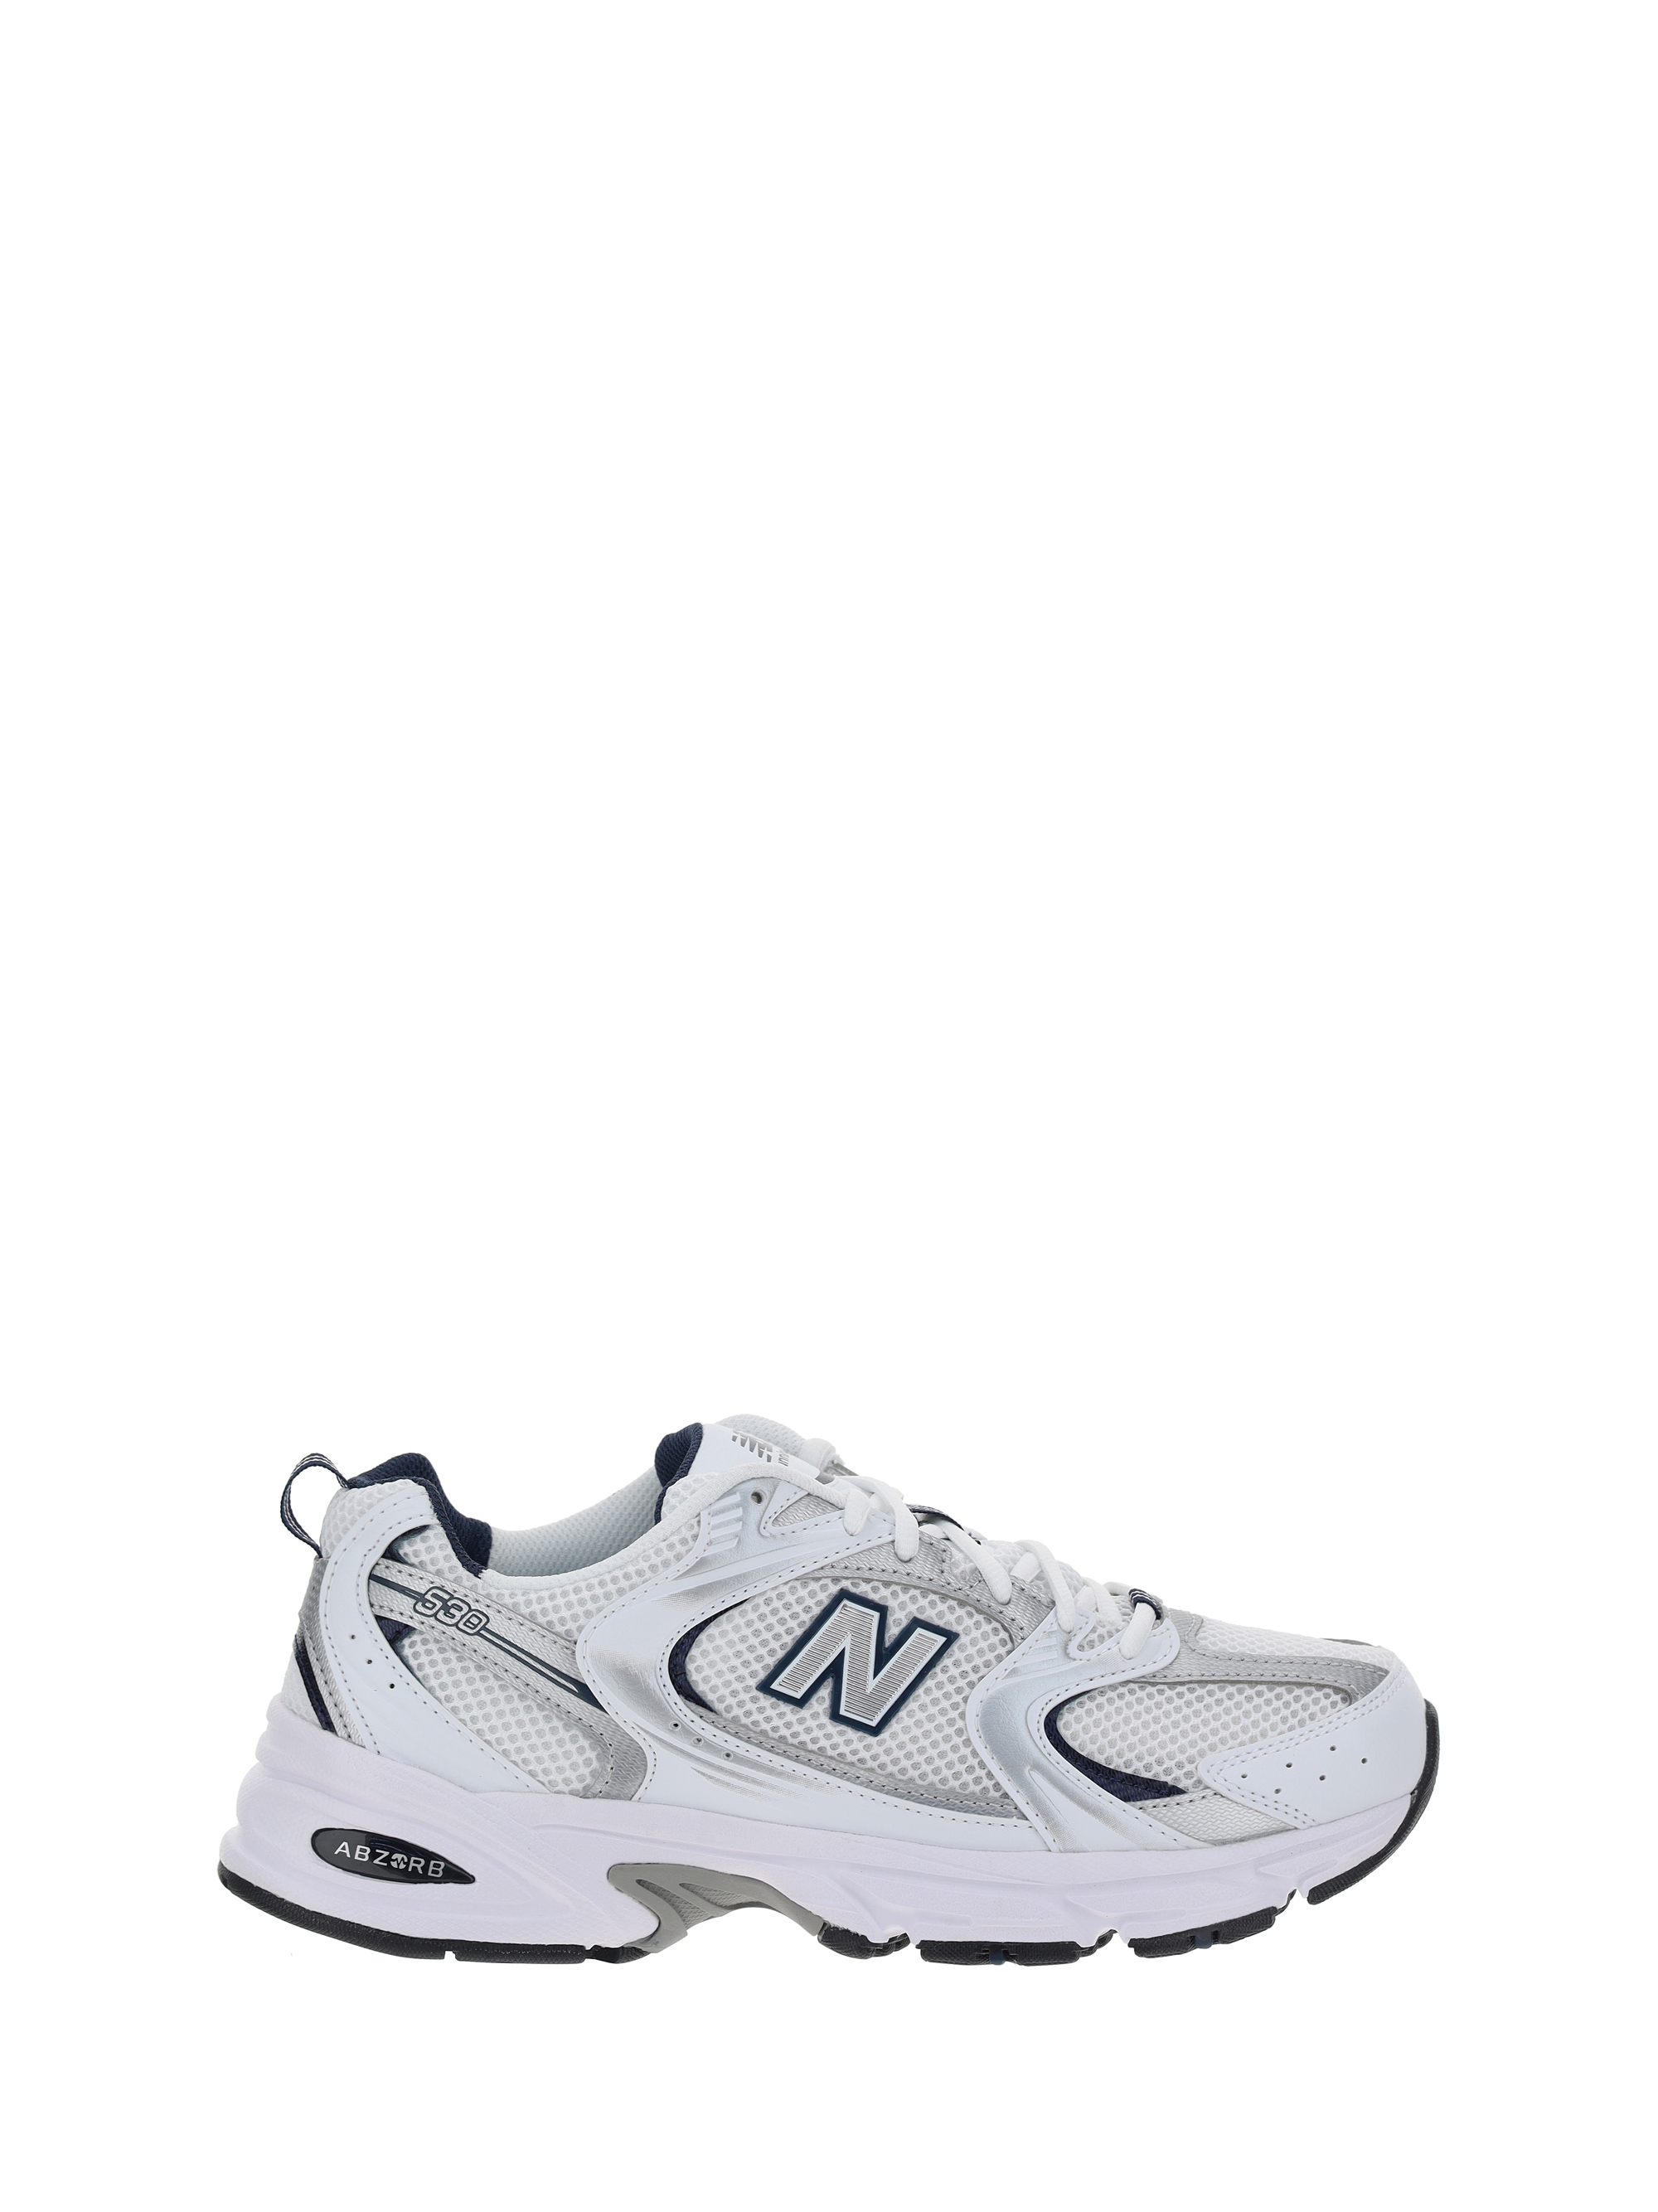 Shop New Balance Lifestyle Sneakers In White/blue D